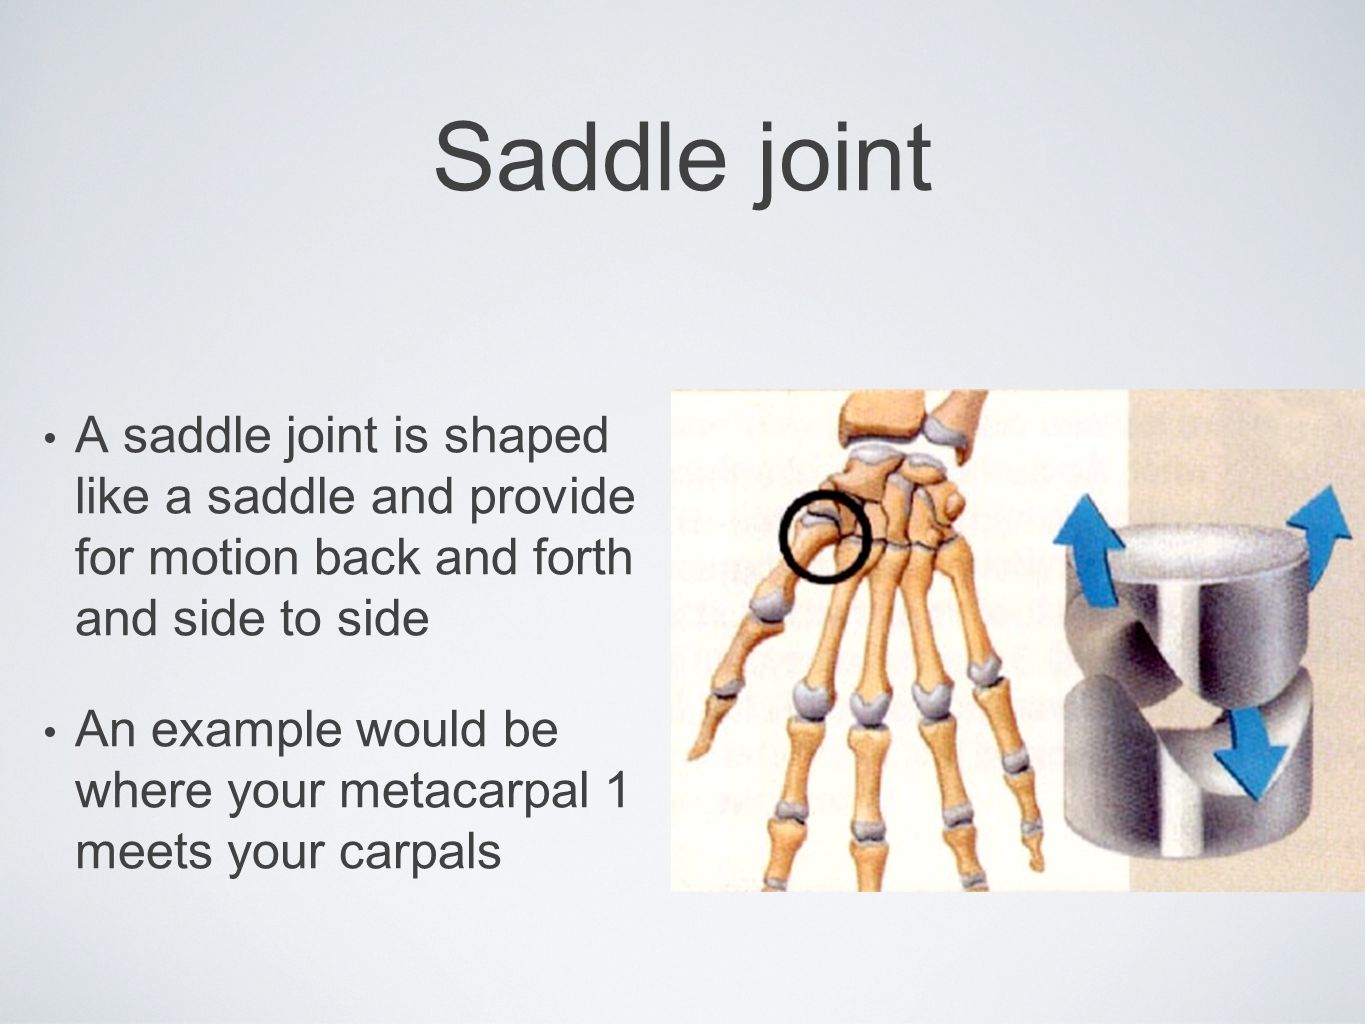 Saddle joint A saddle joint is shaped like a saddle and provide for motion back and forth and side to side.